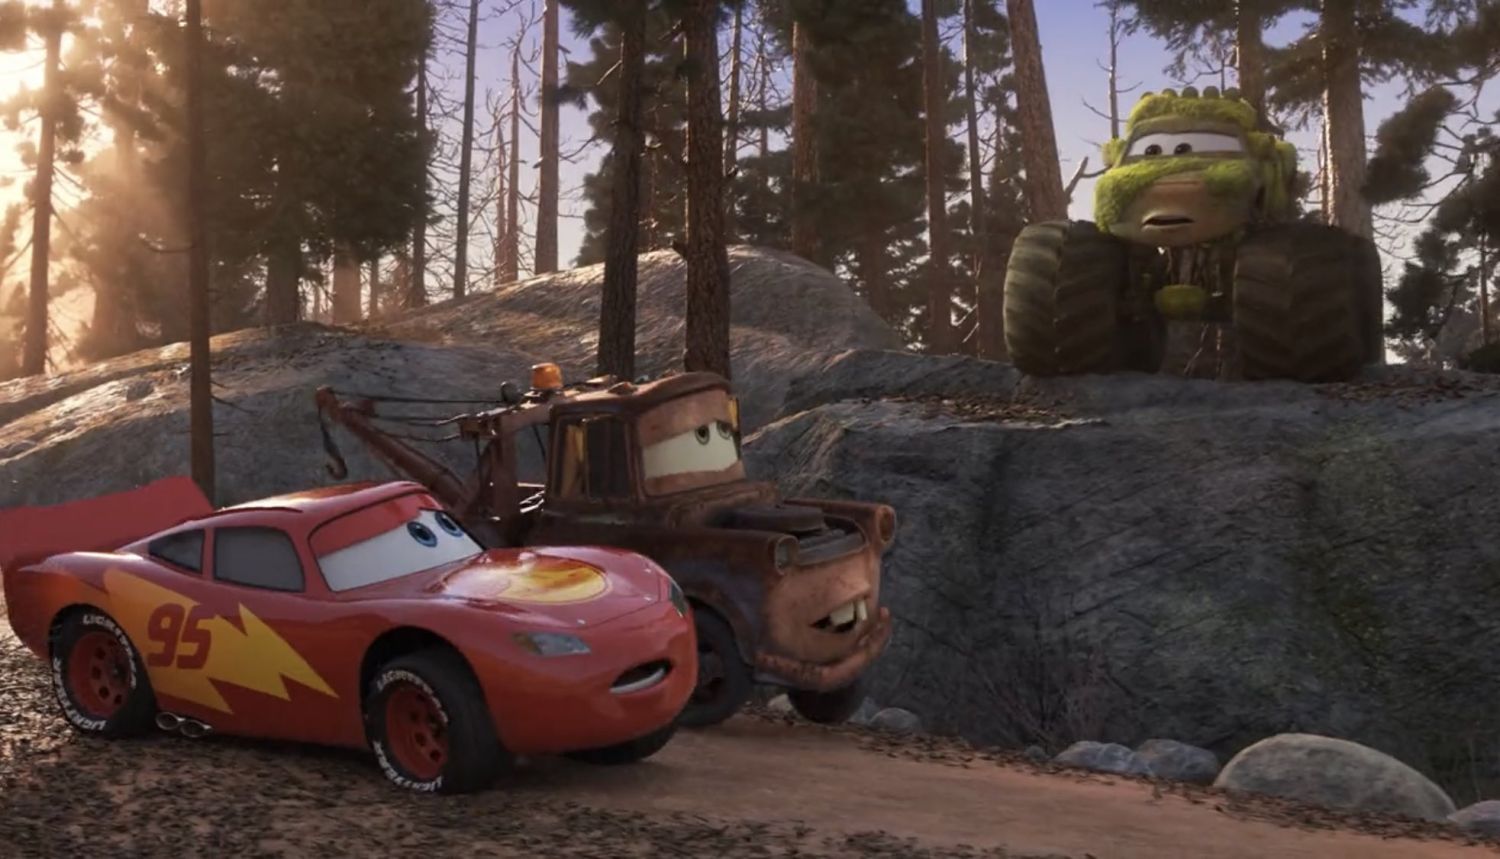 Geek Review: Cars on the Road (Disney+)